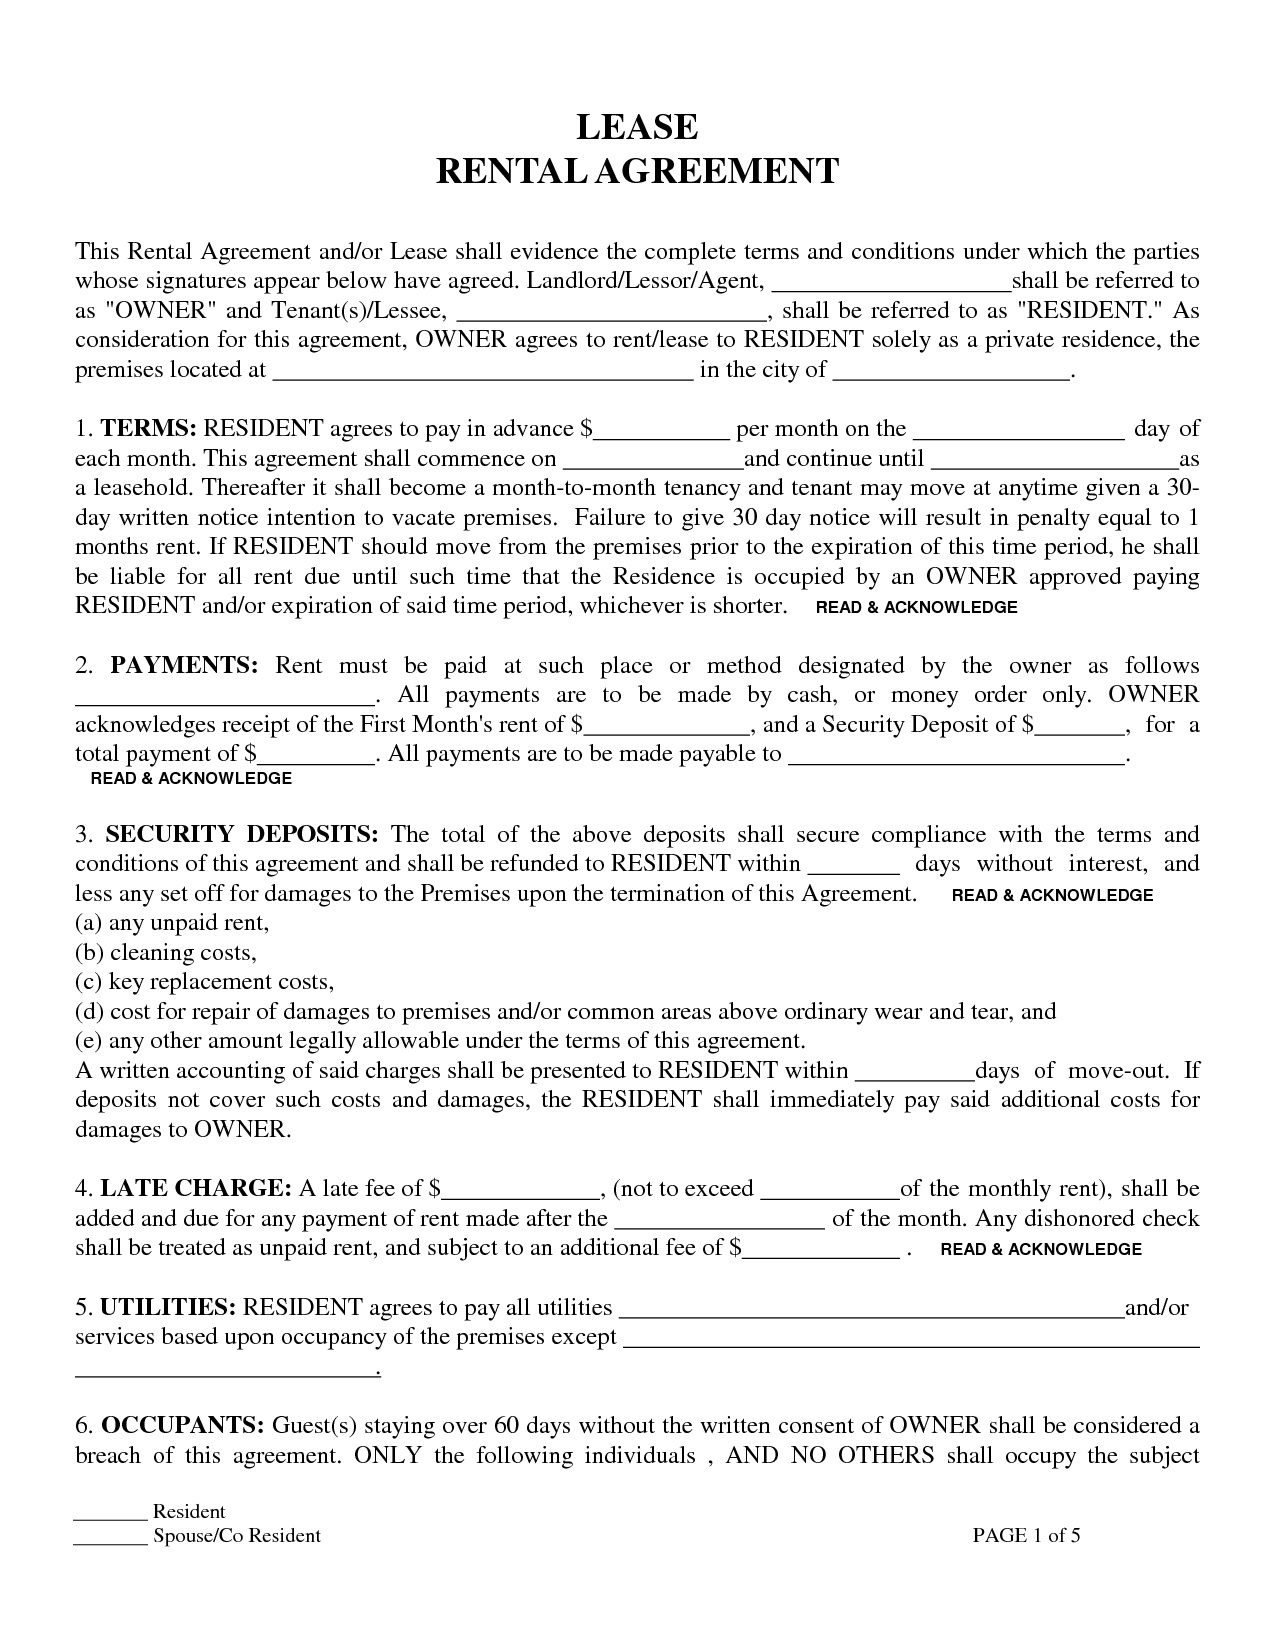 Free Printable Lease Forms Online | Shop Fresh - Free Printable Lease Agreement Forms